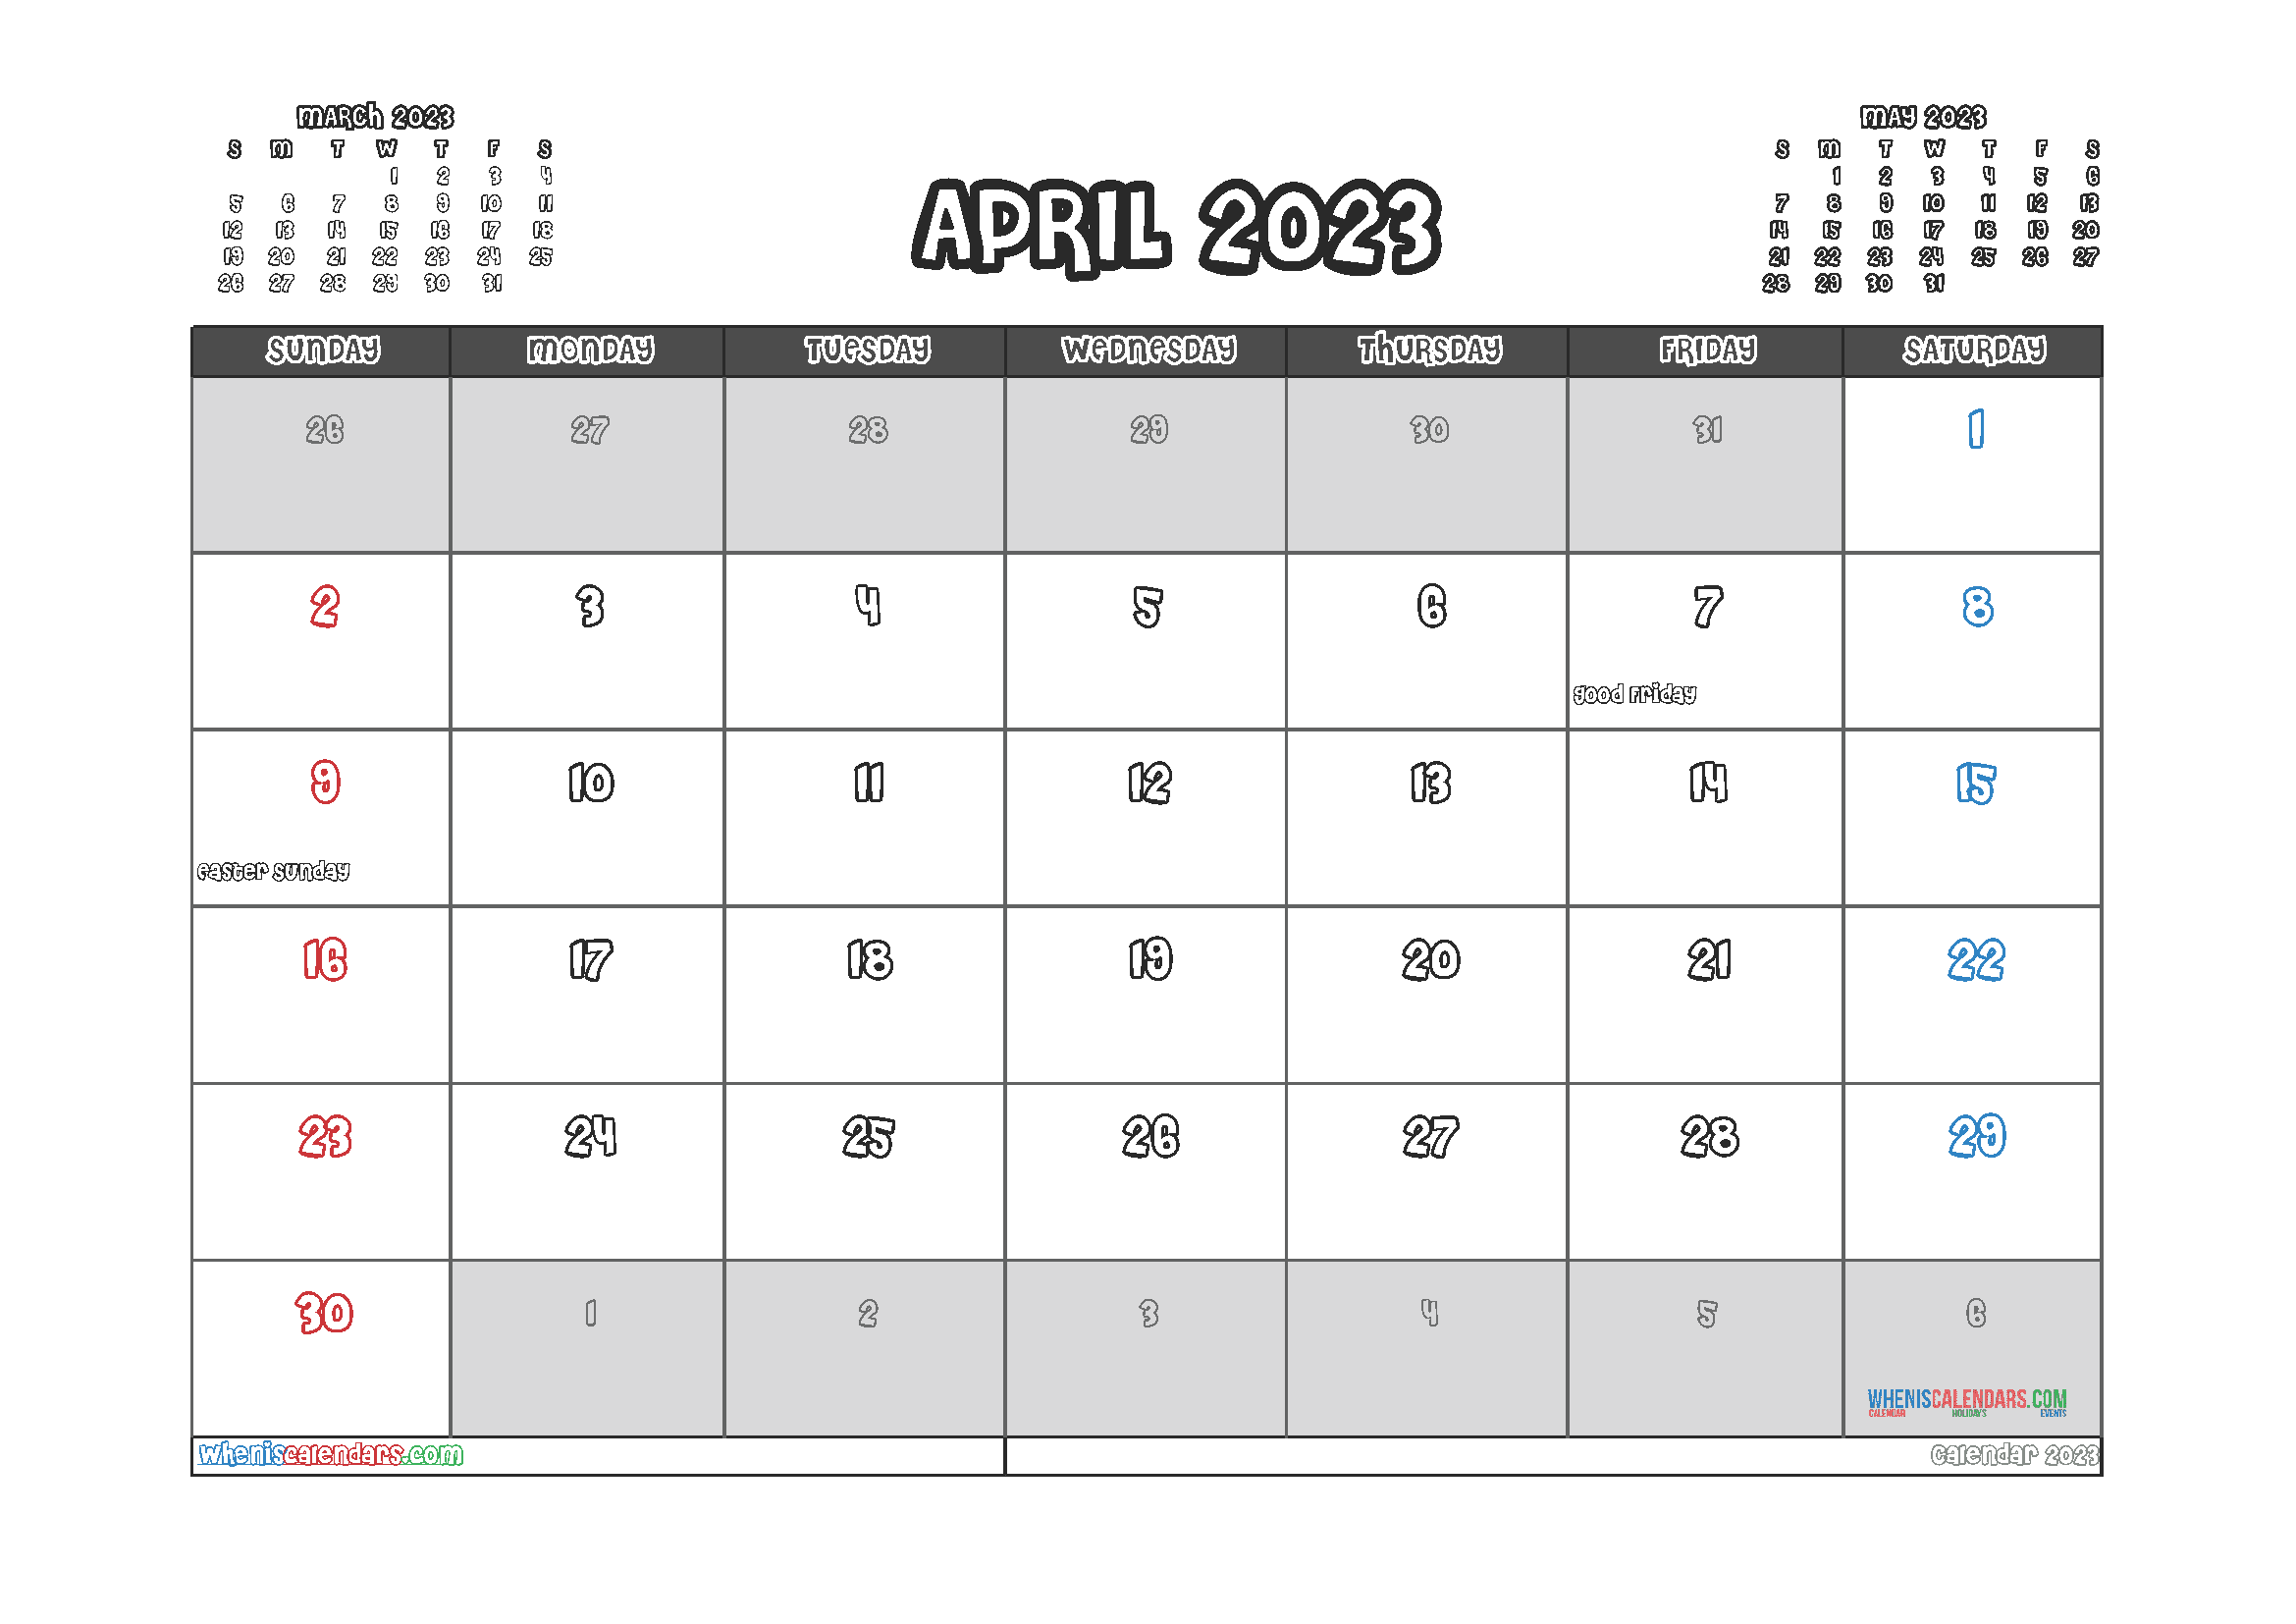 Free Calendar 2023 April with Holidays PDF in Landscape